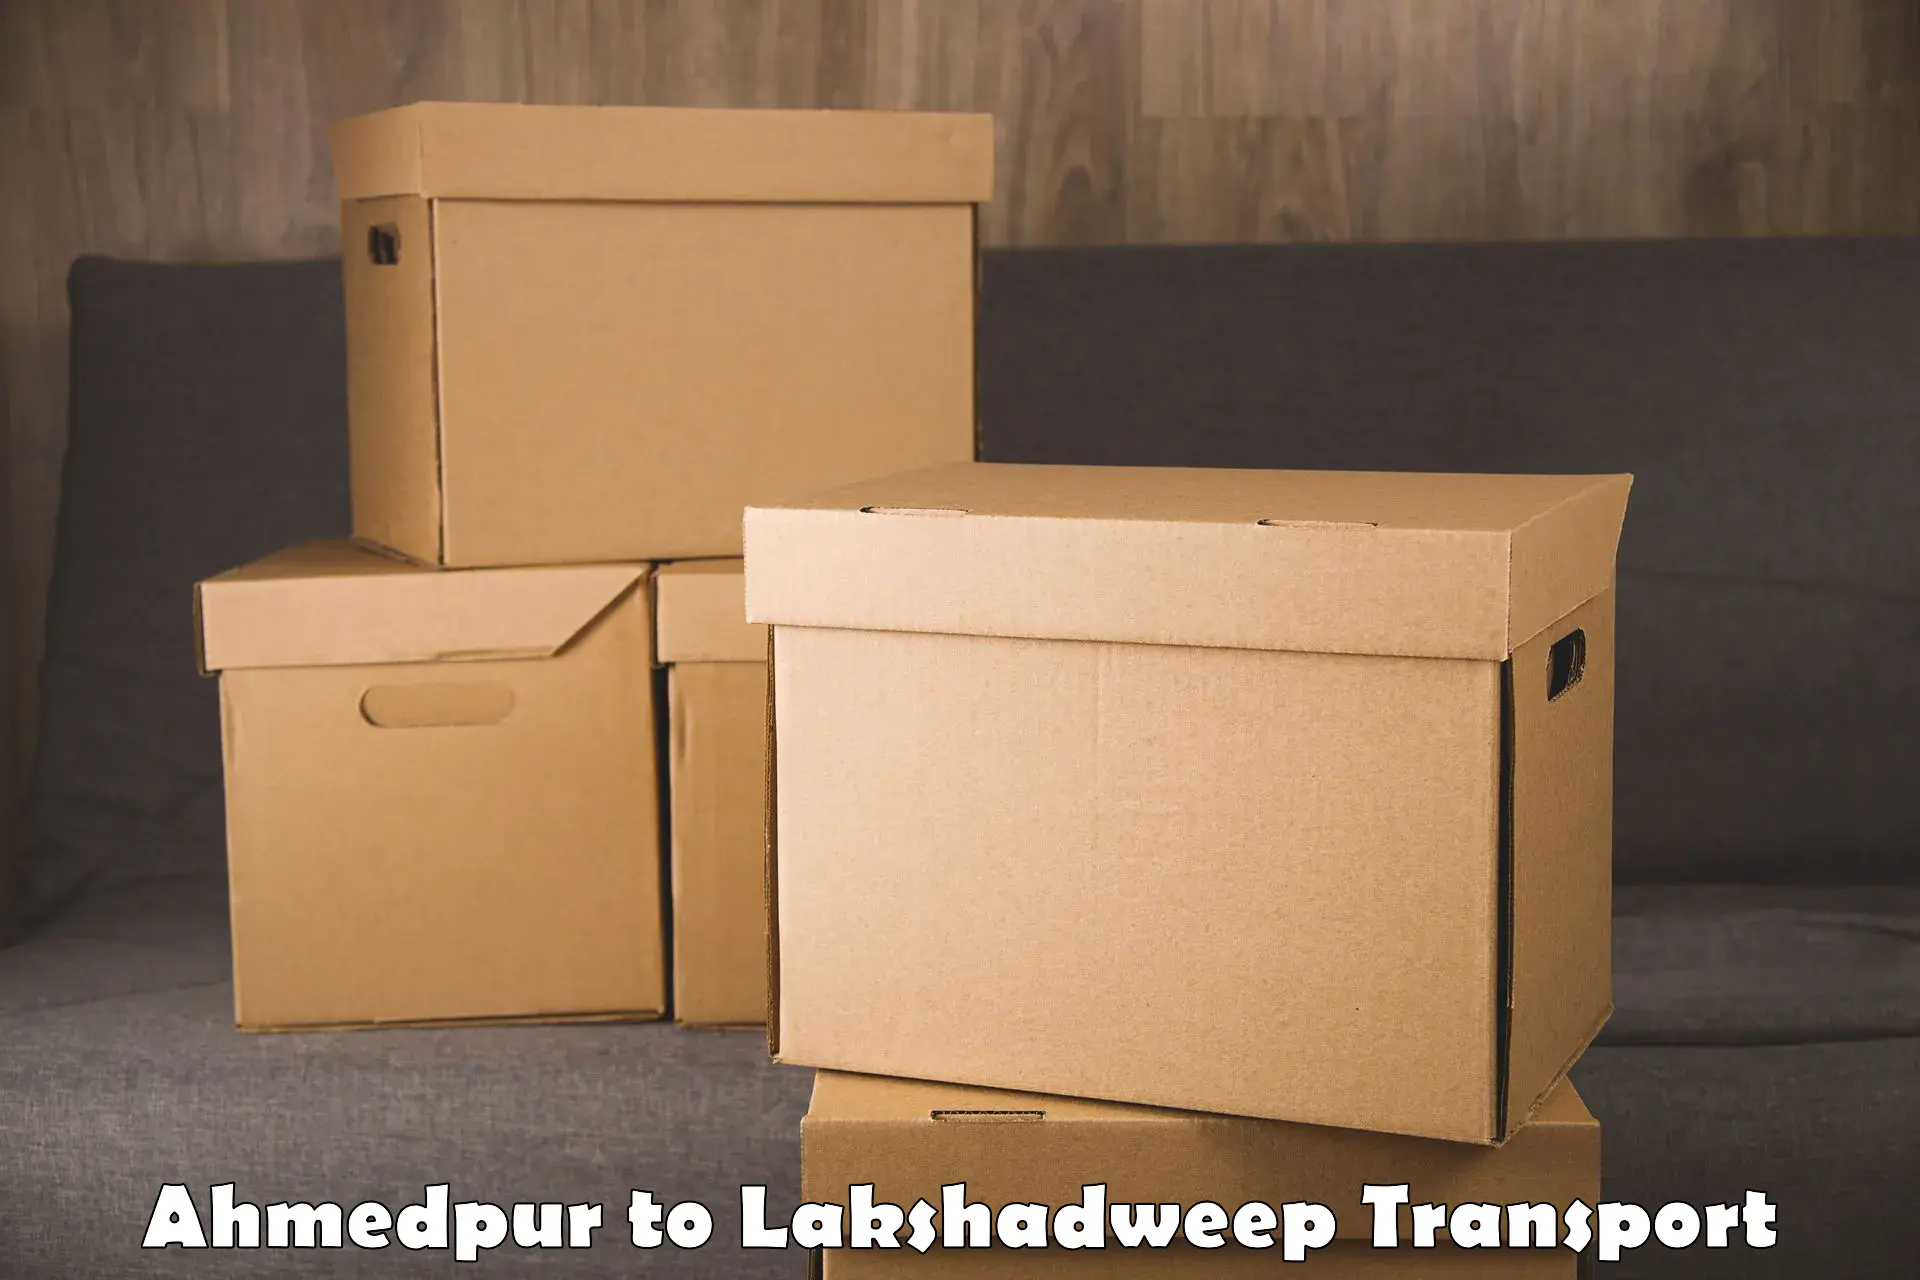 Lorry transport service in Ahmedpur to Lakshadweep